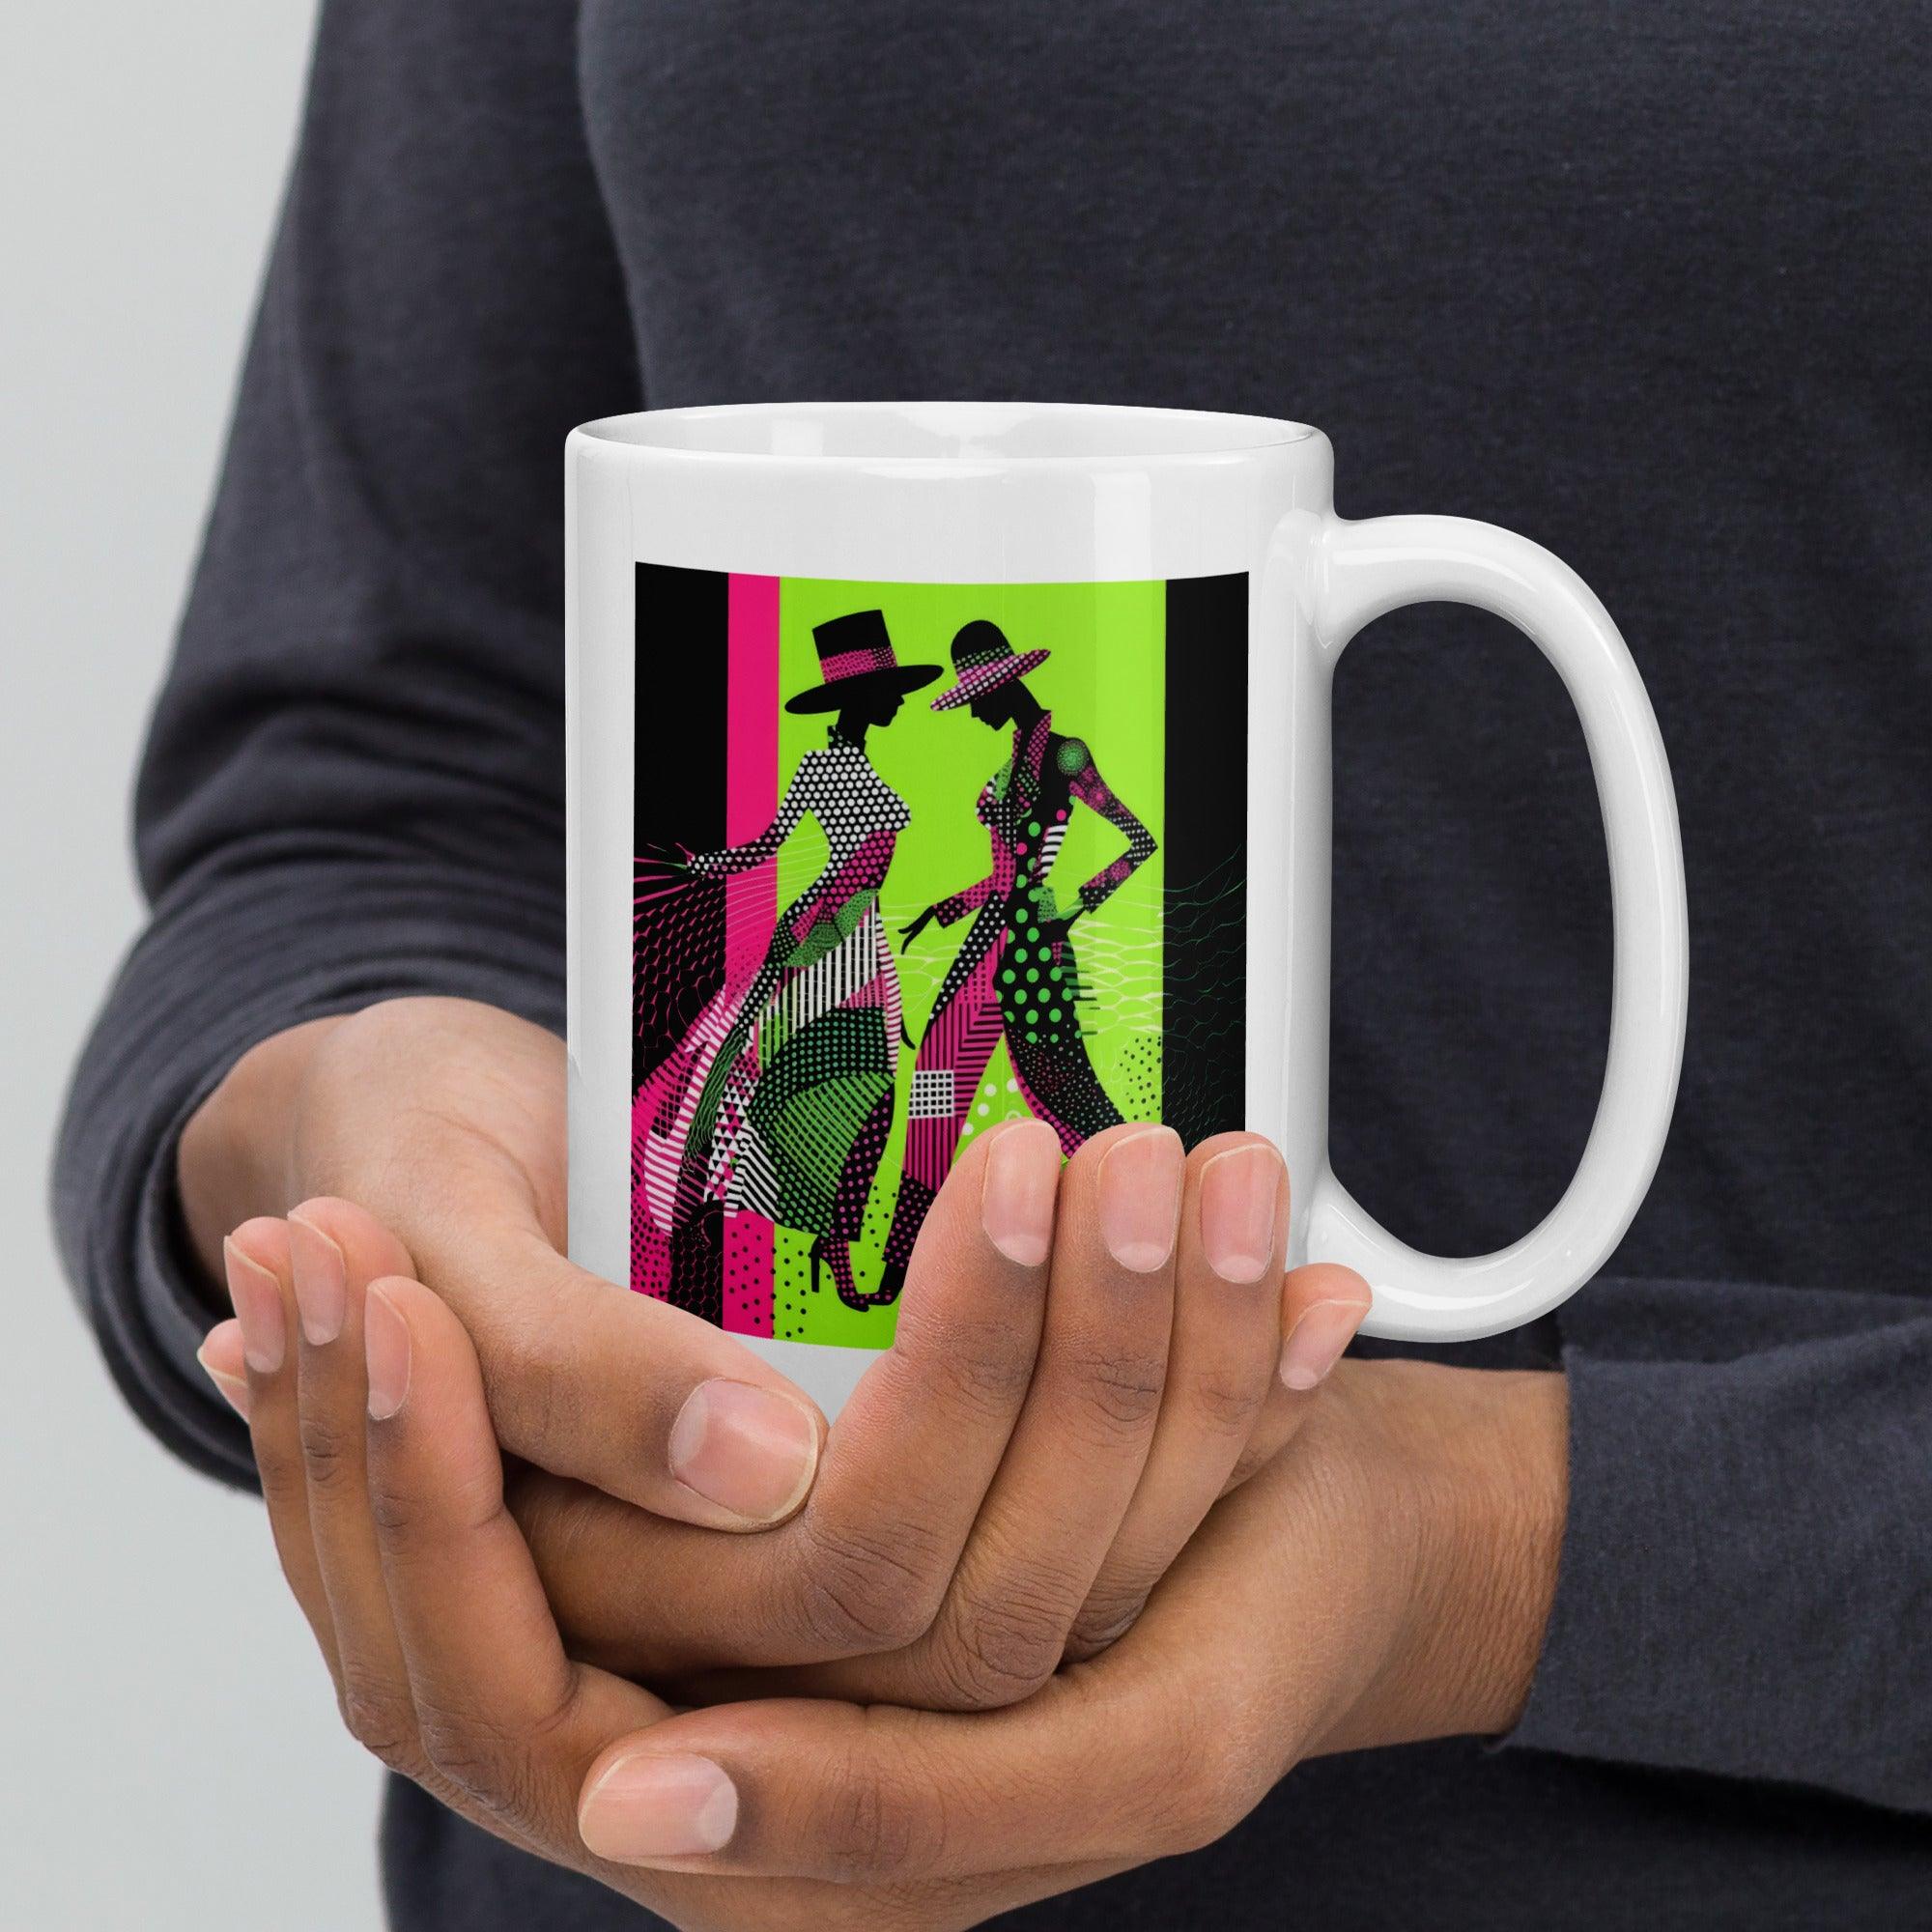 Art-inspired white glossy coffee mug with a balletic fashion design.